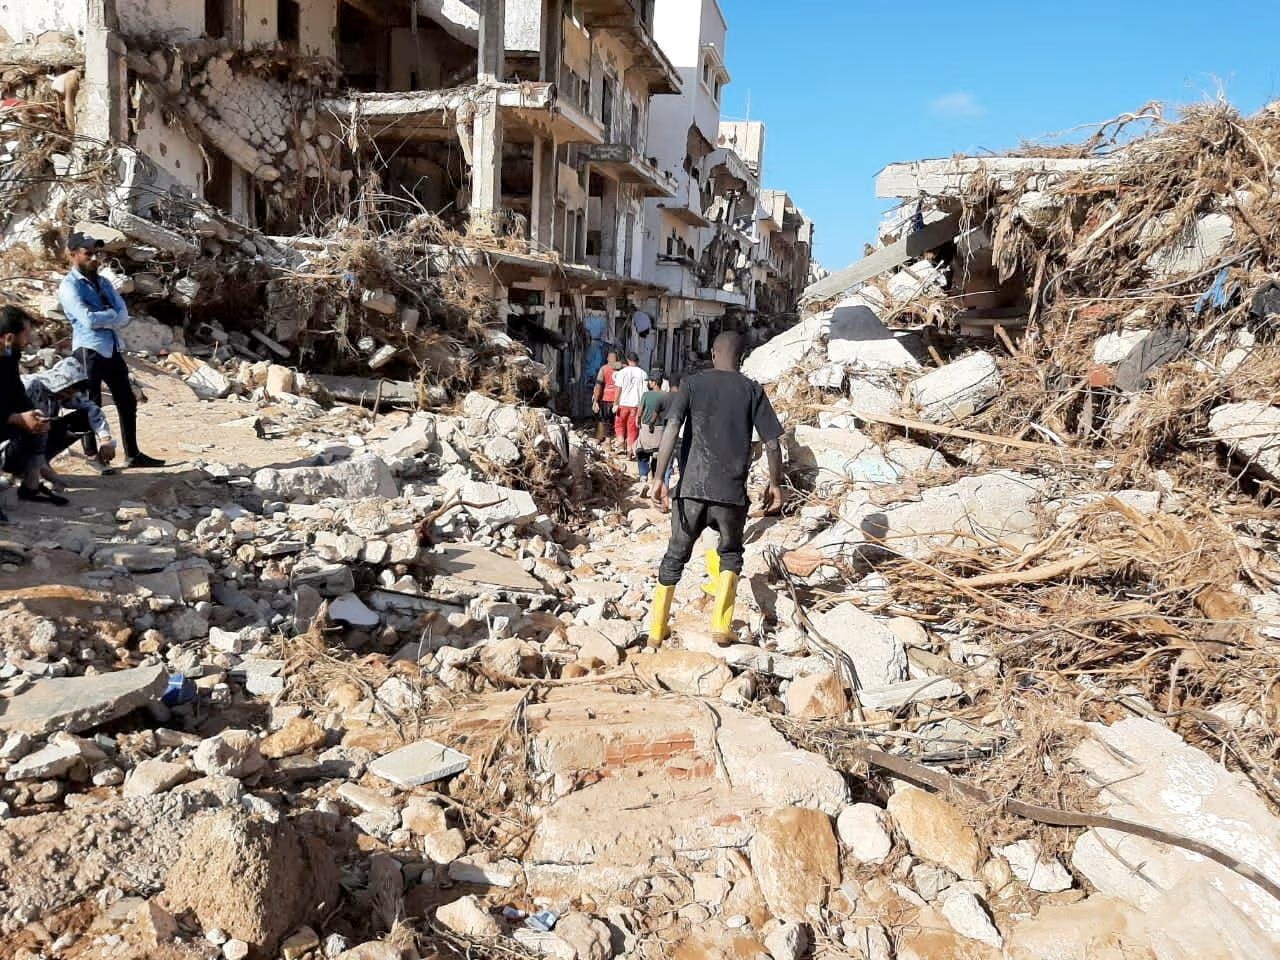 A boy in yellow boots navigates rubble on a Derma street.